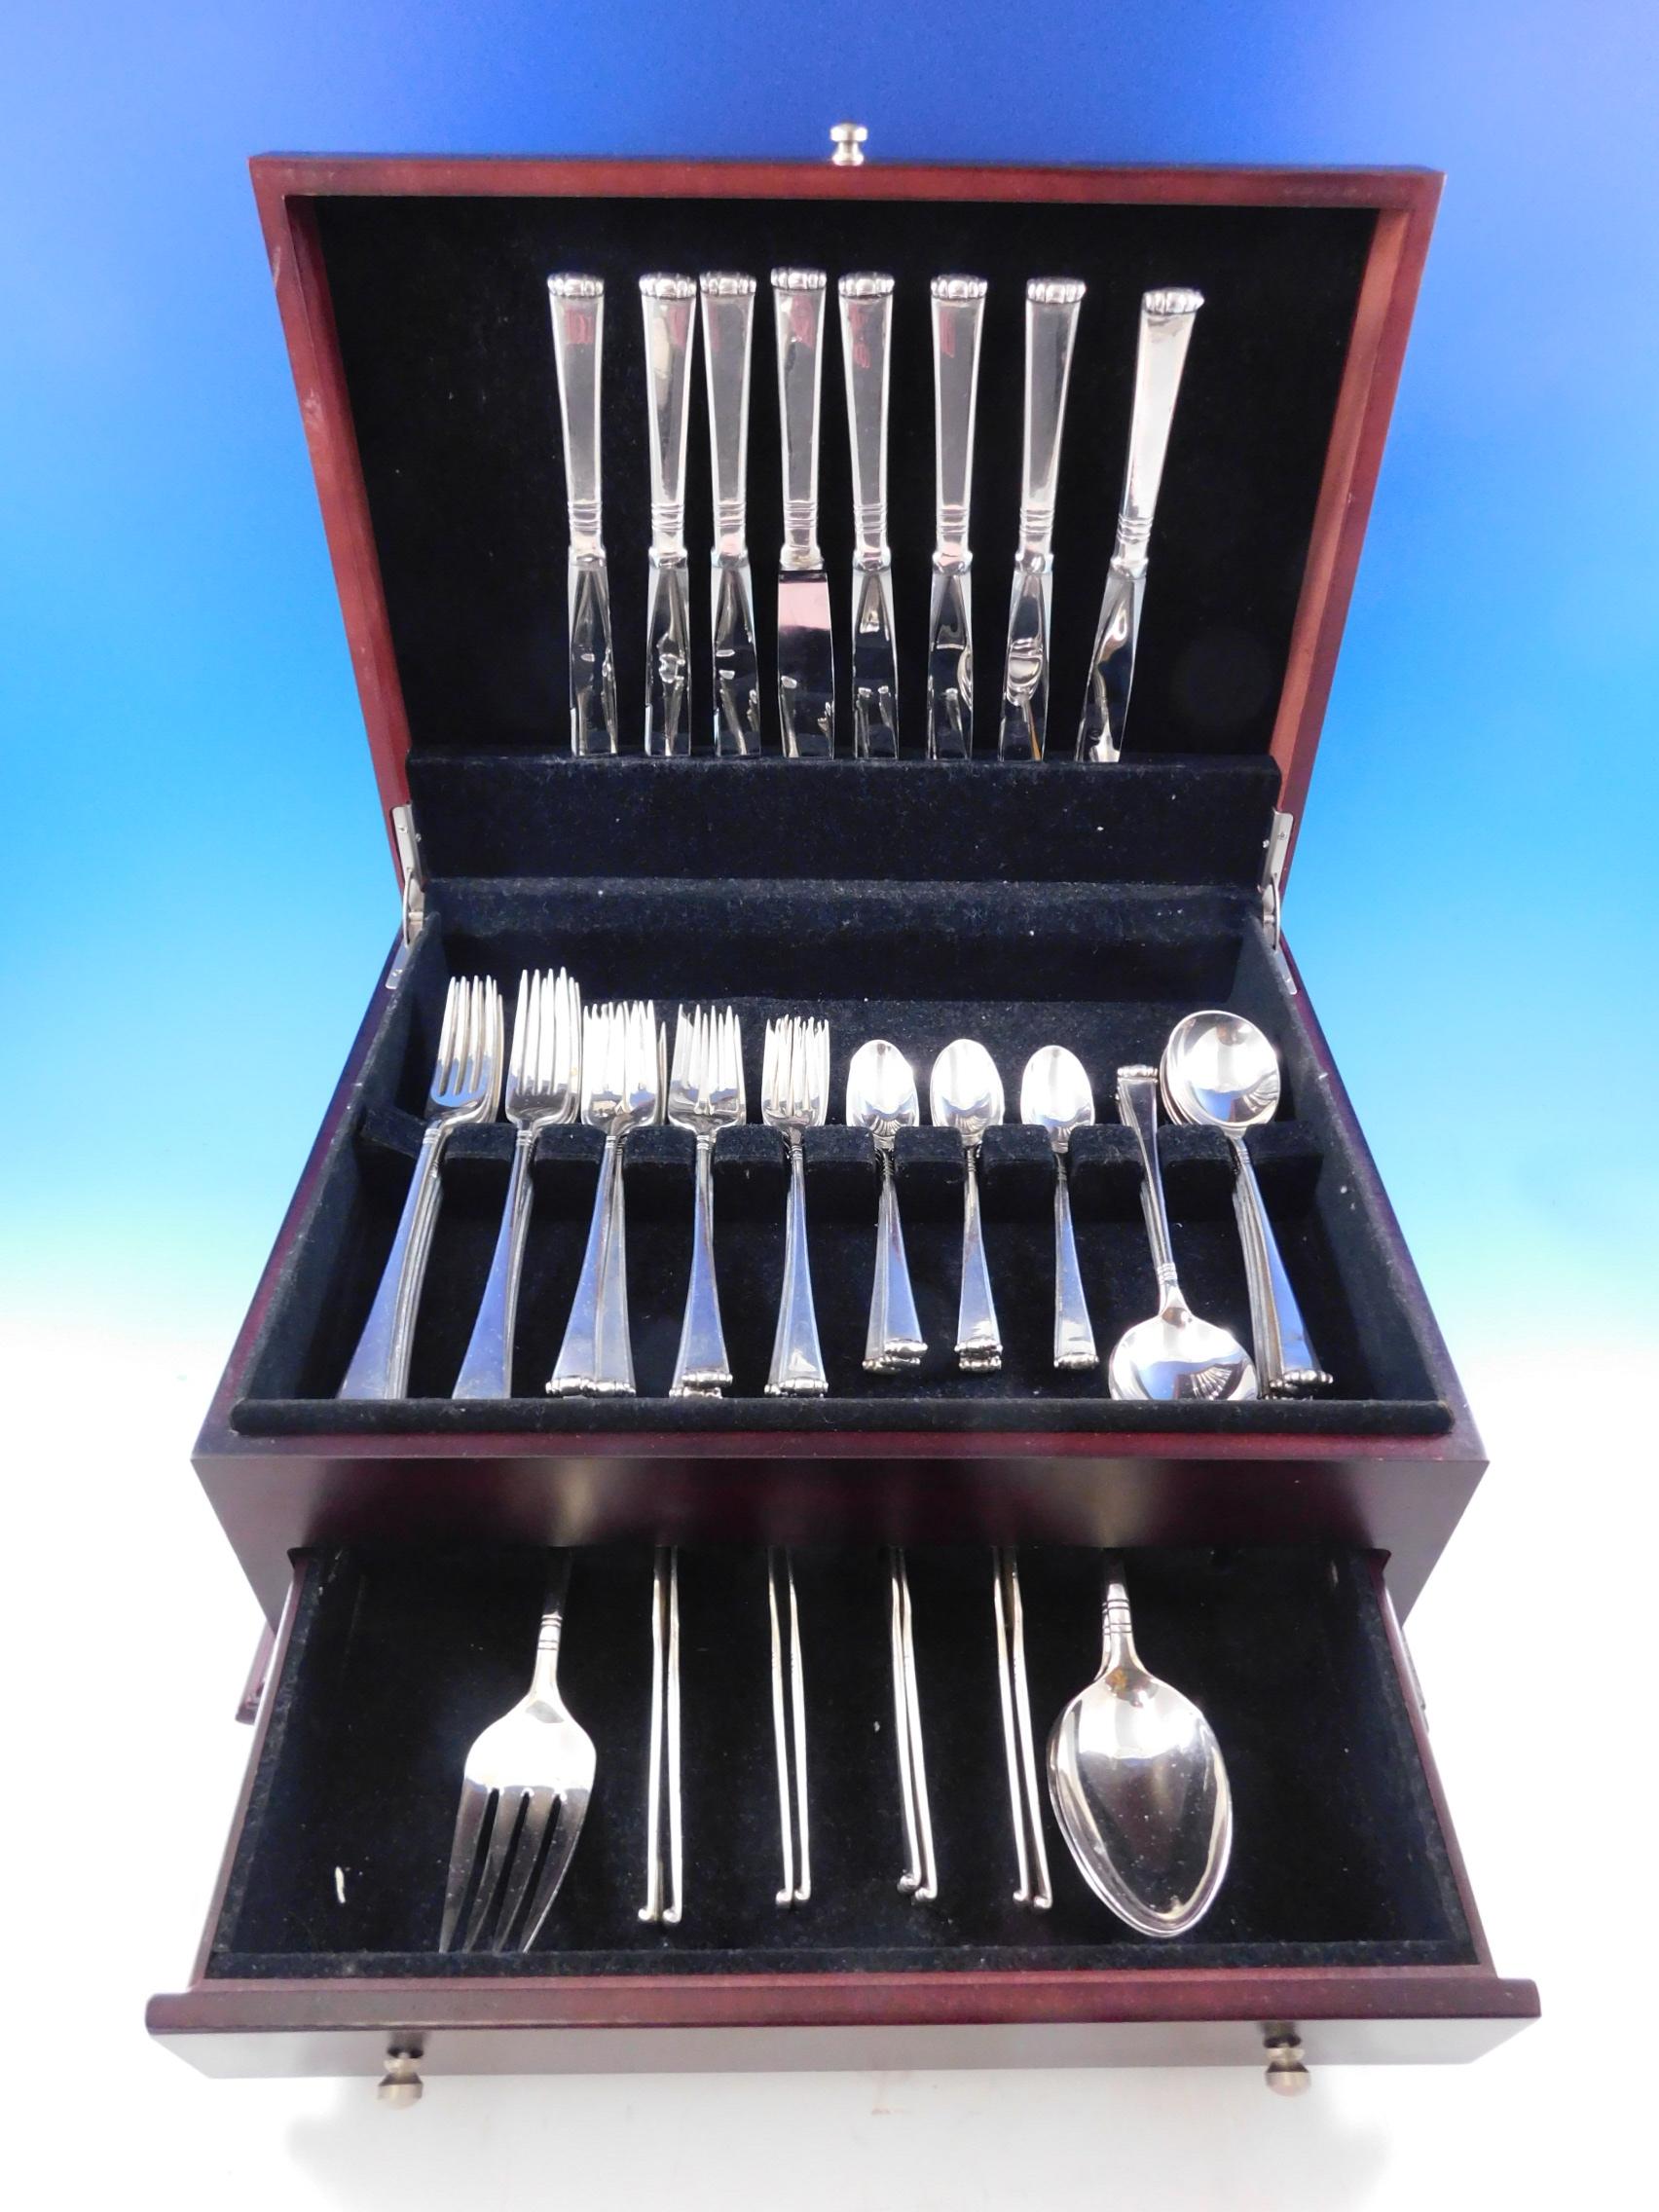 Rare dinner size Marie Louise by Tane (Mexico) sterling silver flatware set, 54 pieces. This service is handmade and includes:

8 dinner knives, 9 3/8